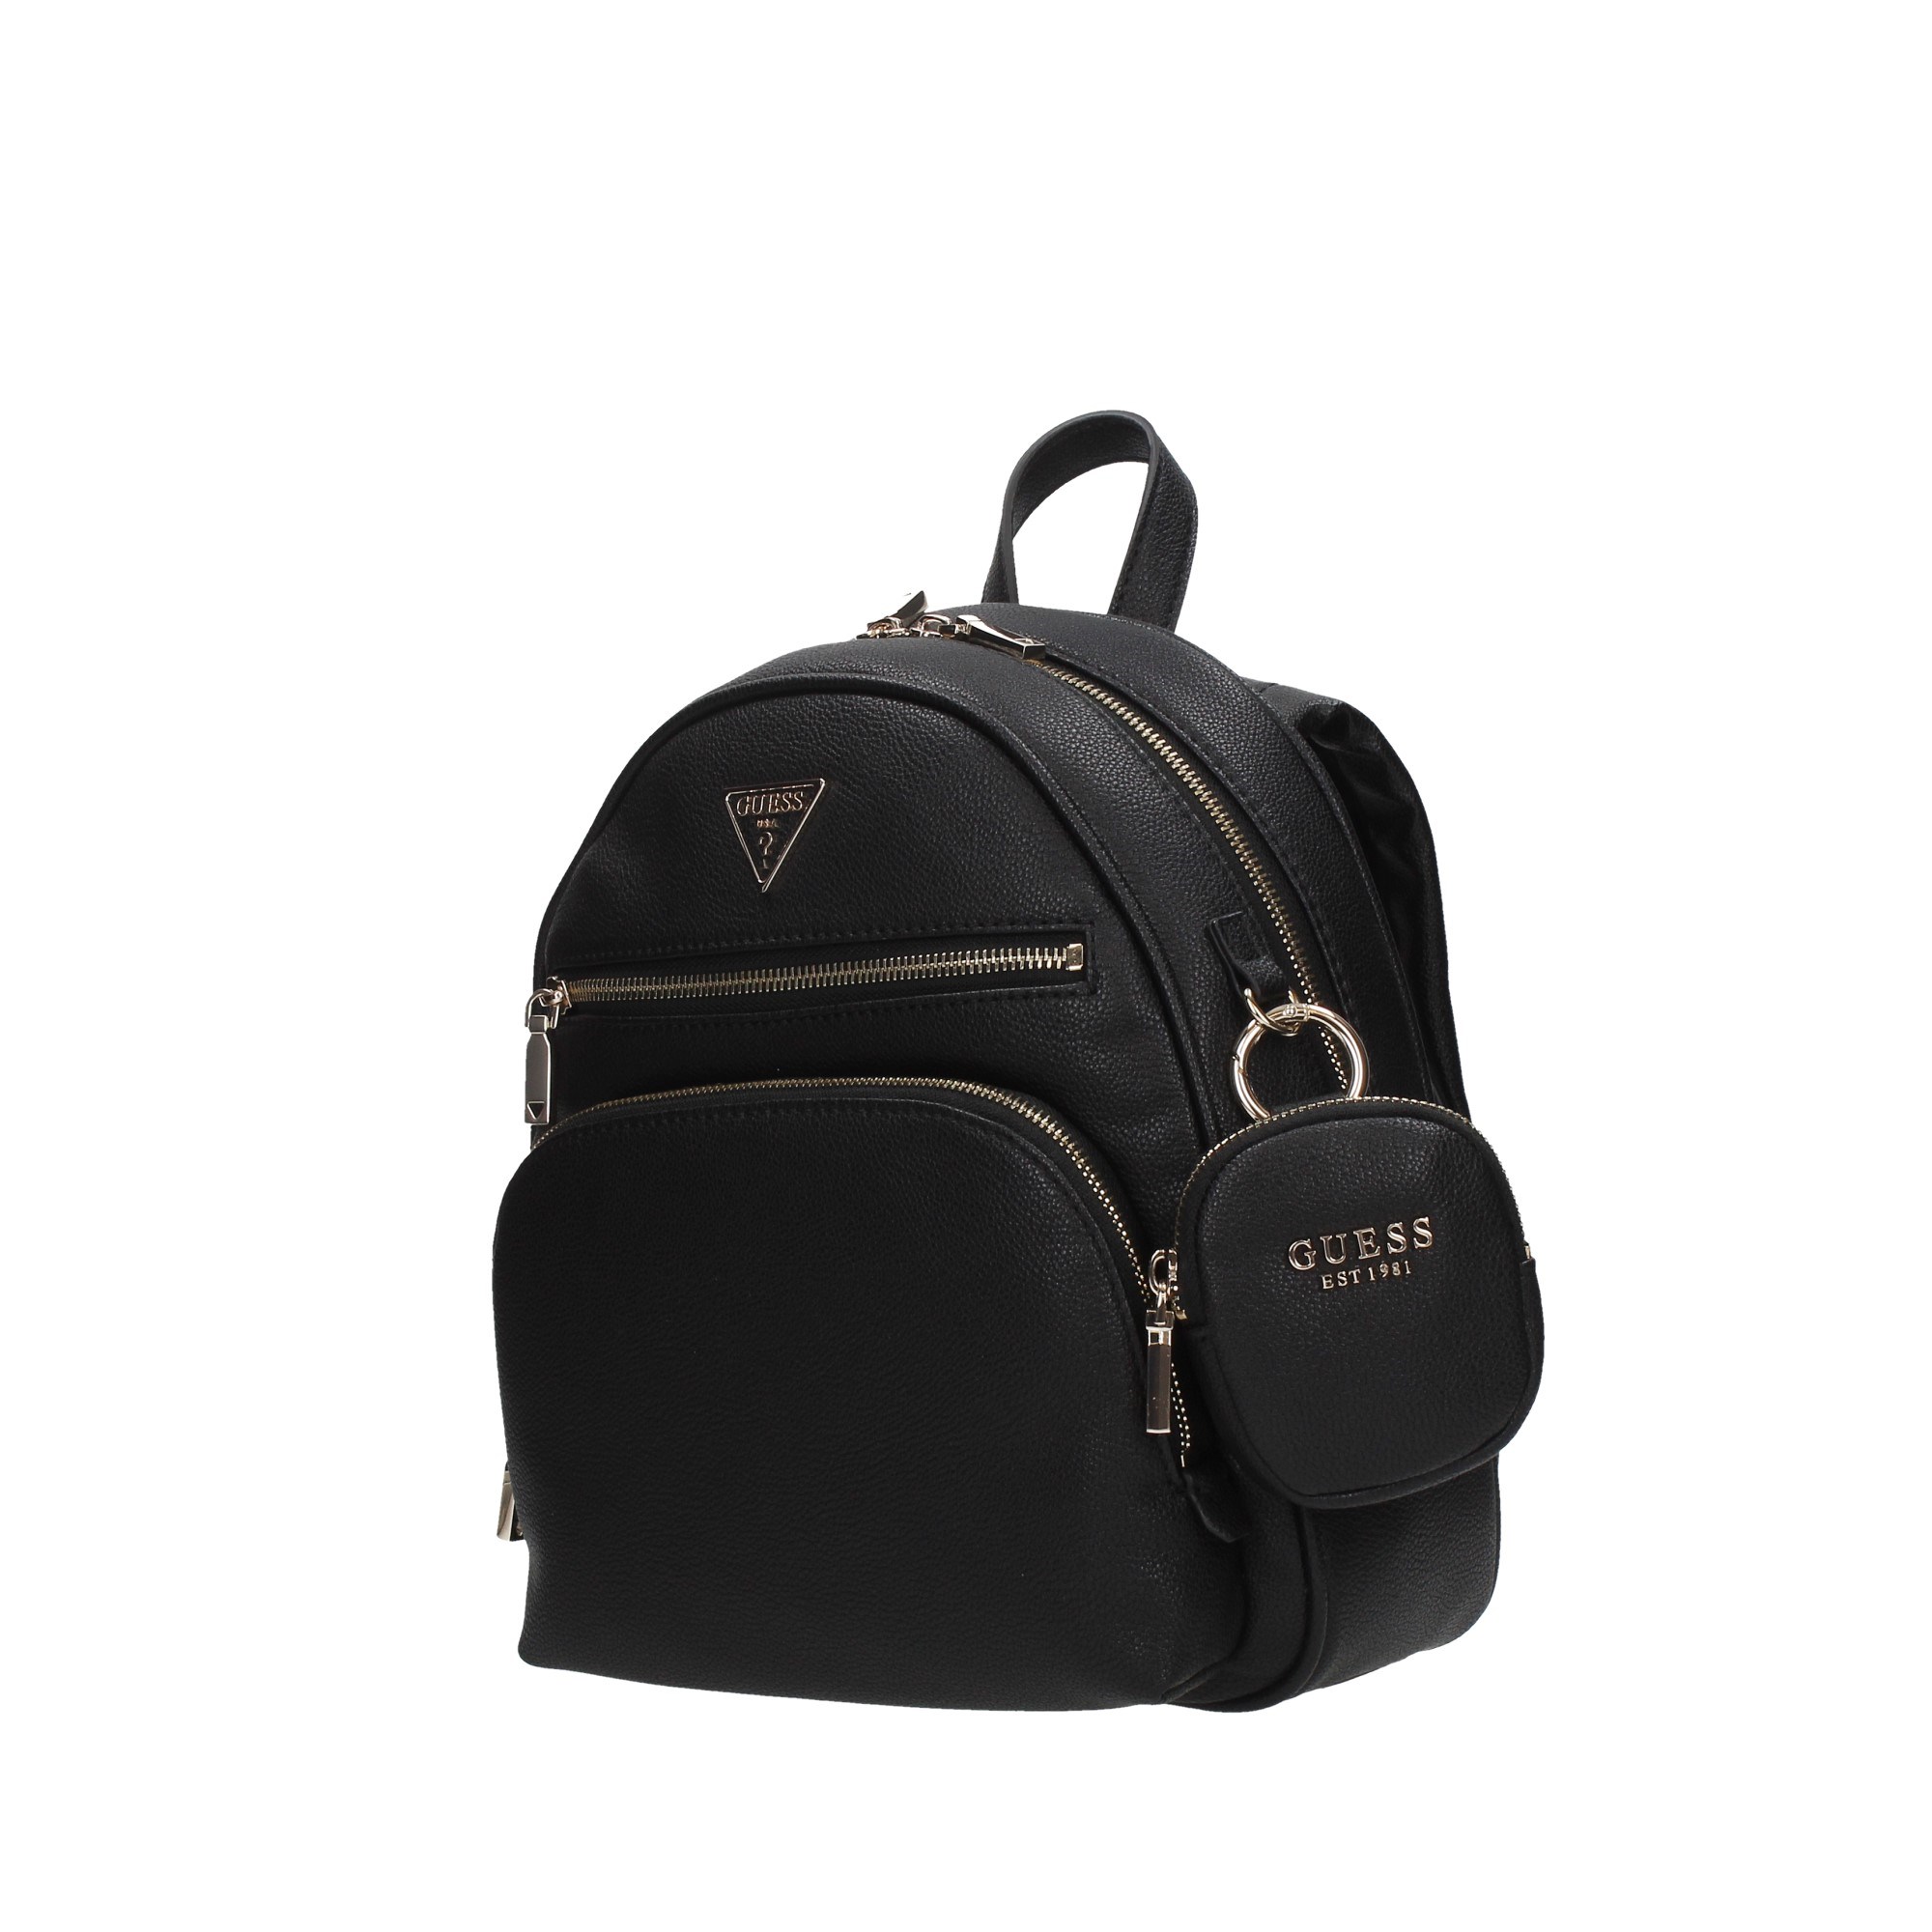 Guess Borse Accessories Women Backpack HWBG90/06320